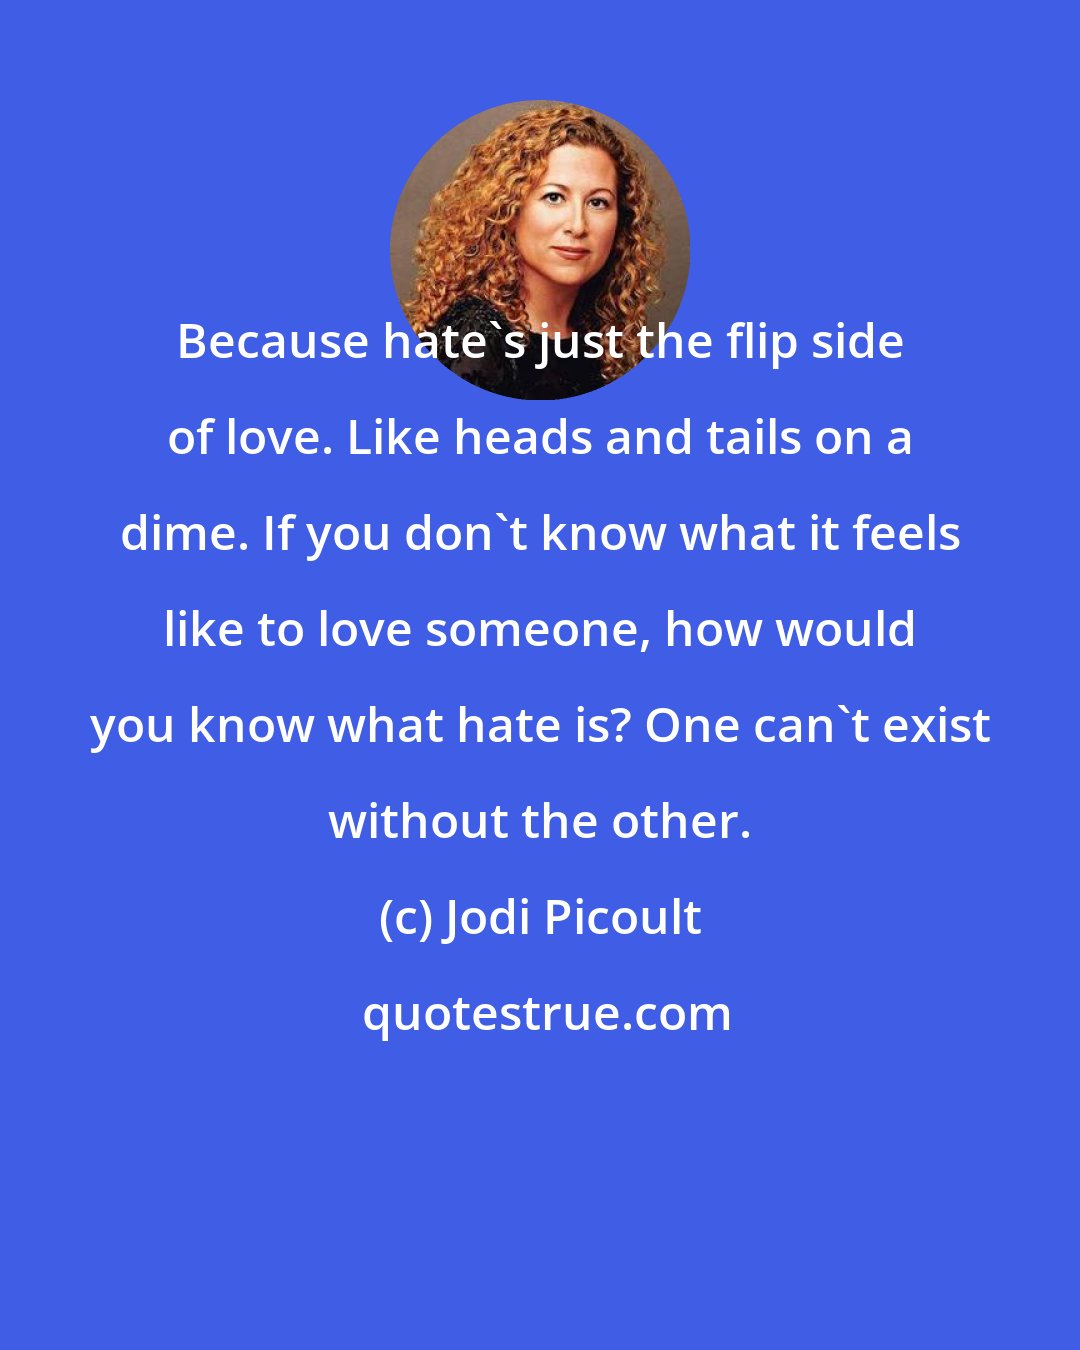 Jodi Picoult: Because hate's just the flip side of love. Like heads and tails on a dime. If you don't know what it feels like to love someone, how would you know what hate is? One can't exist without the other.